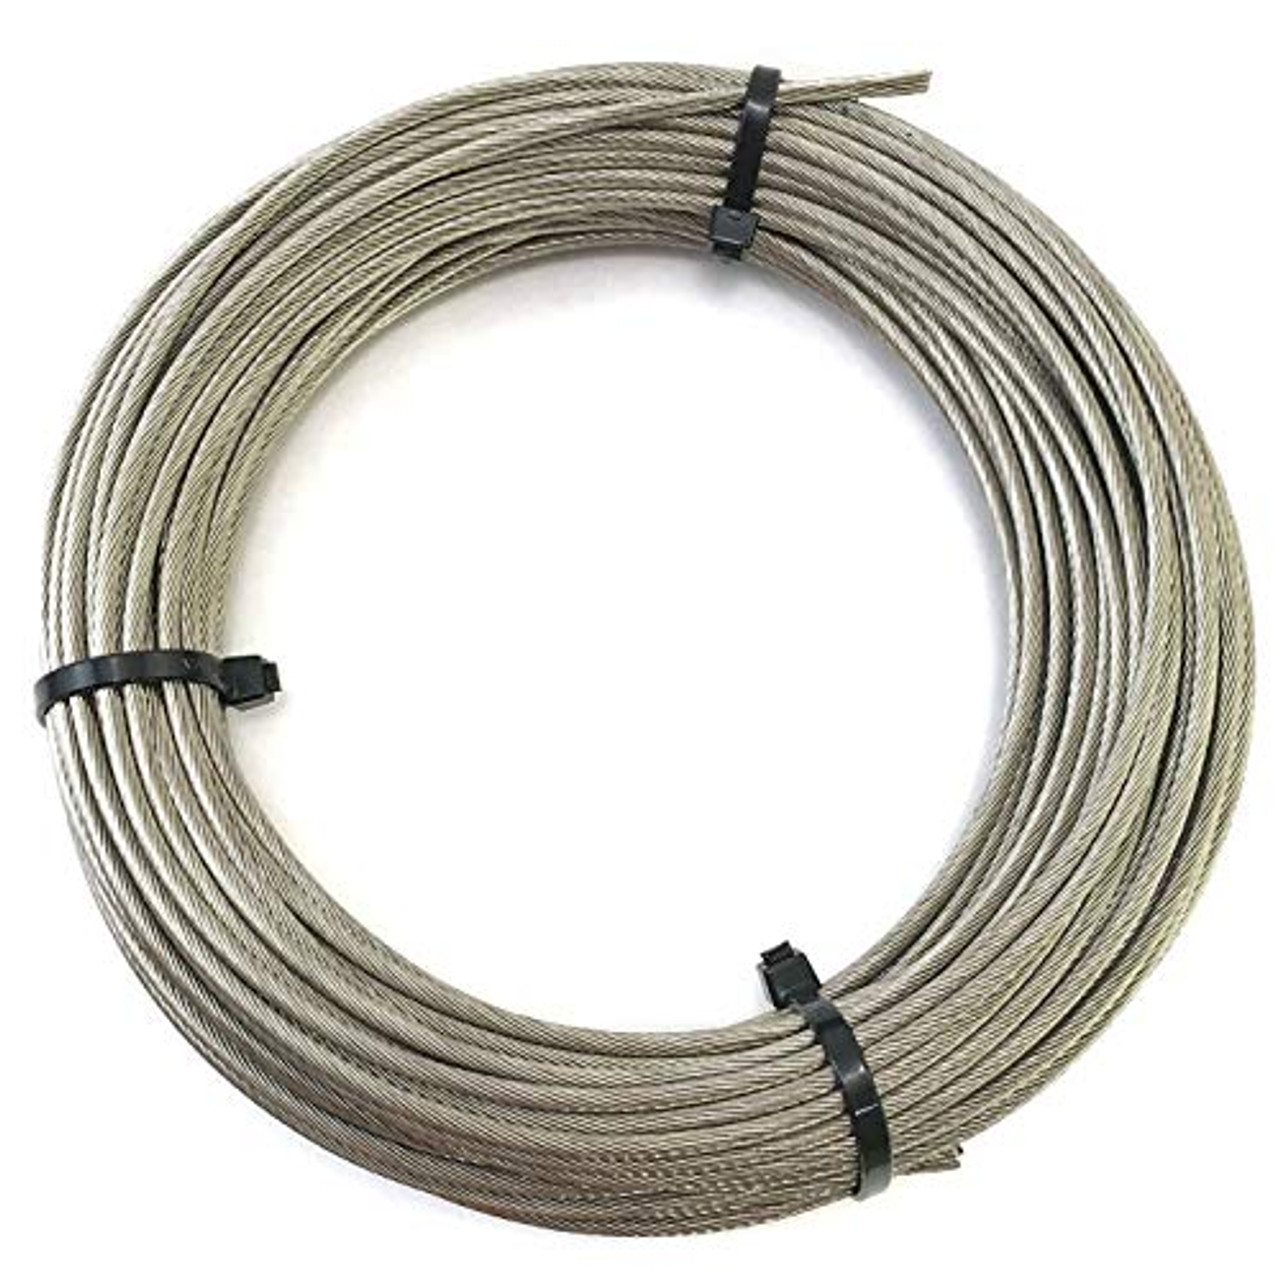 Cable Railing Kits Includes 1/16 inch x 50 Feet Stainless Steel Wire Rope Cable, 